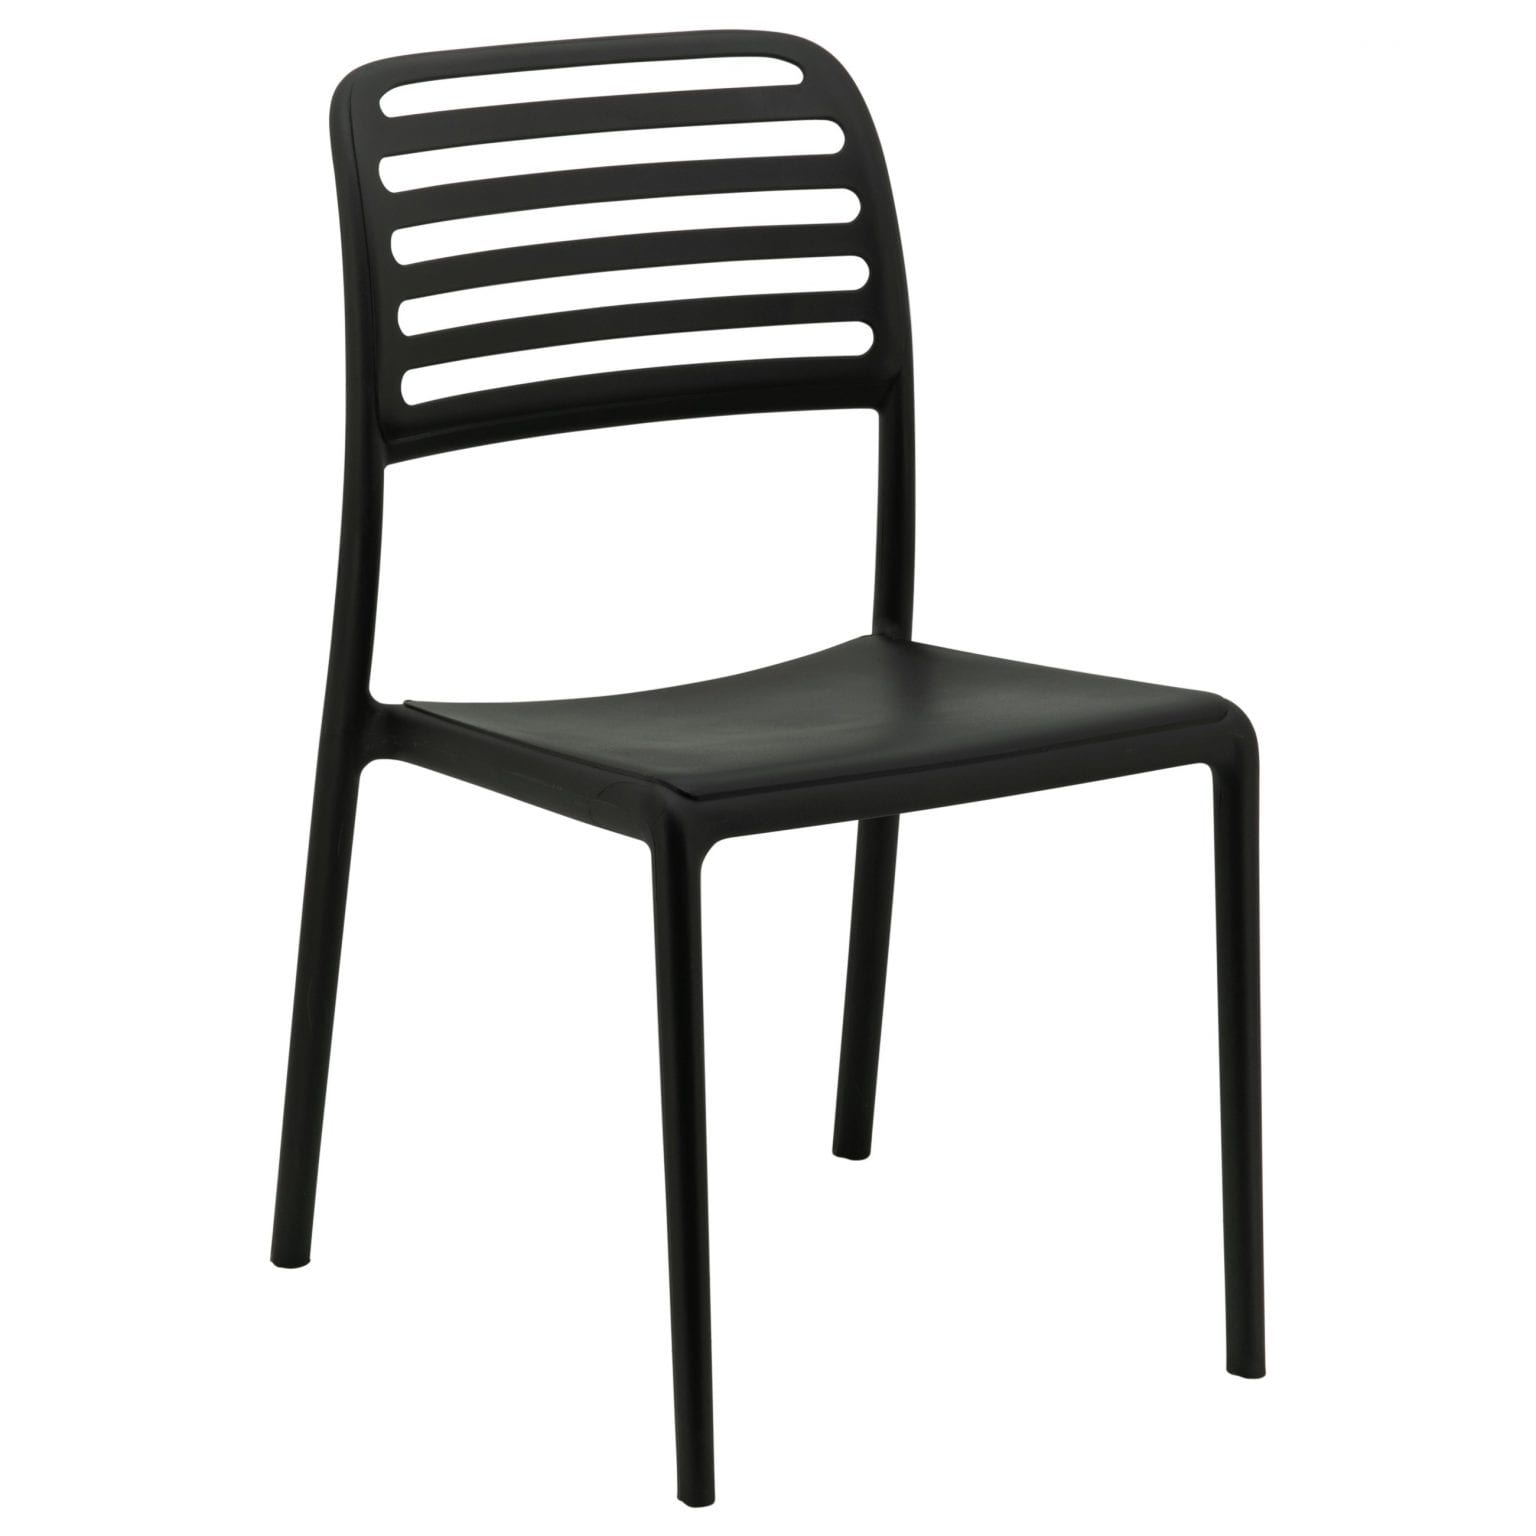 Revamp Your Cafe Furniture With Stylish Cafe Chairs Service Cafe